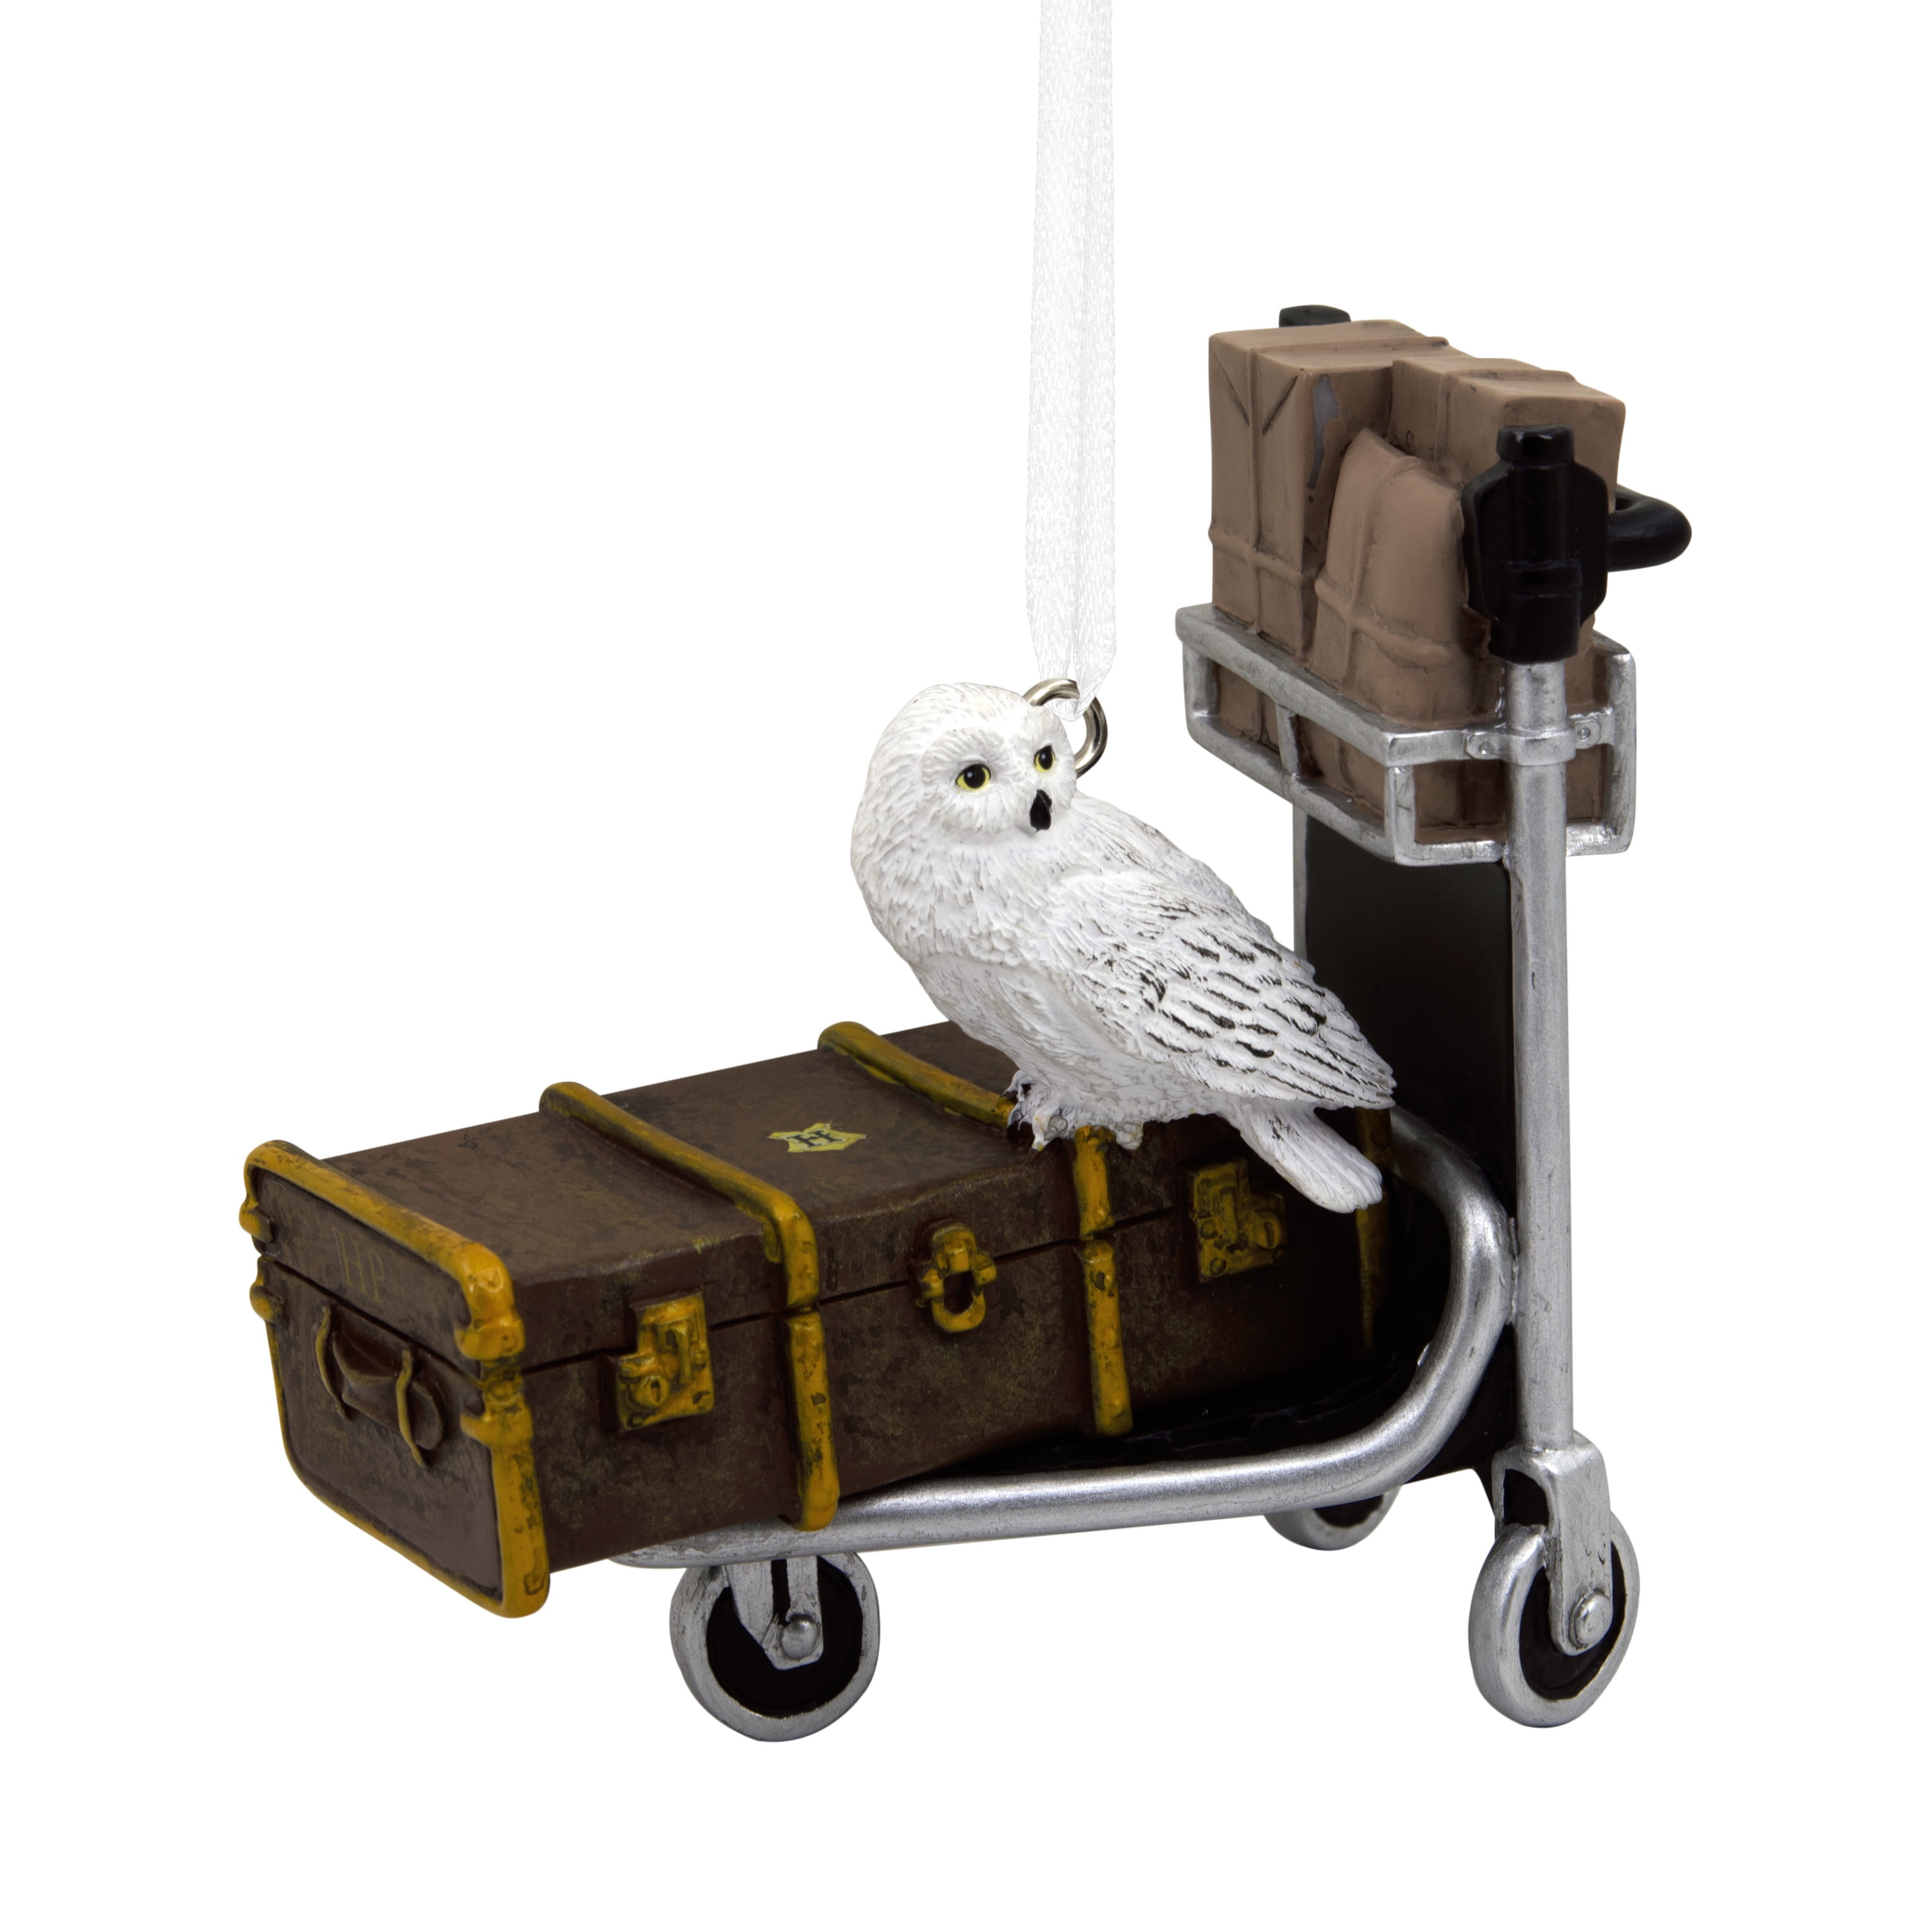 Hallmark Ornament (Harry Potter Trolley Cart With Hedwig) - Walmart Exclusive